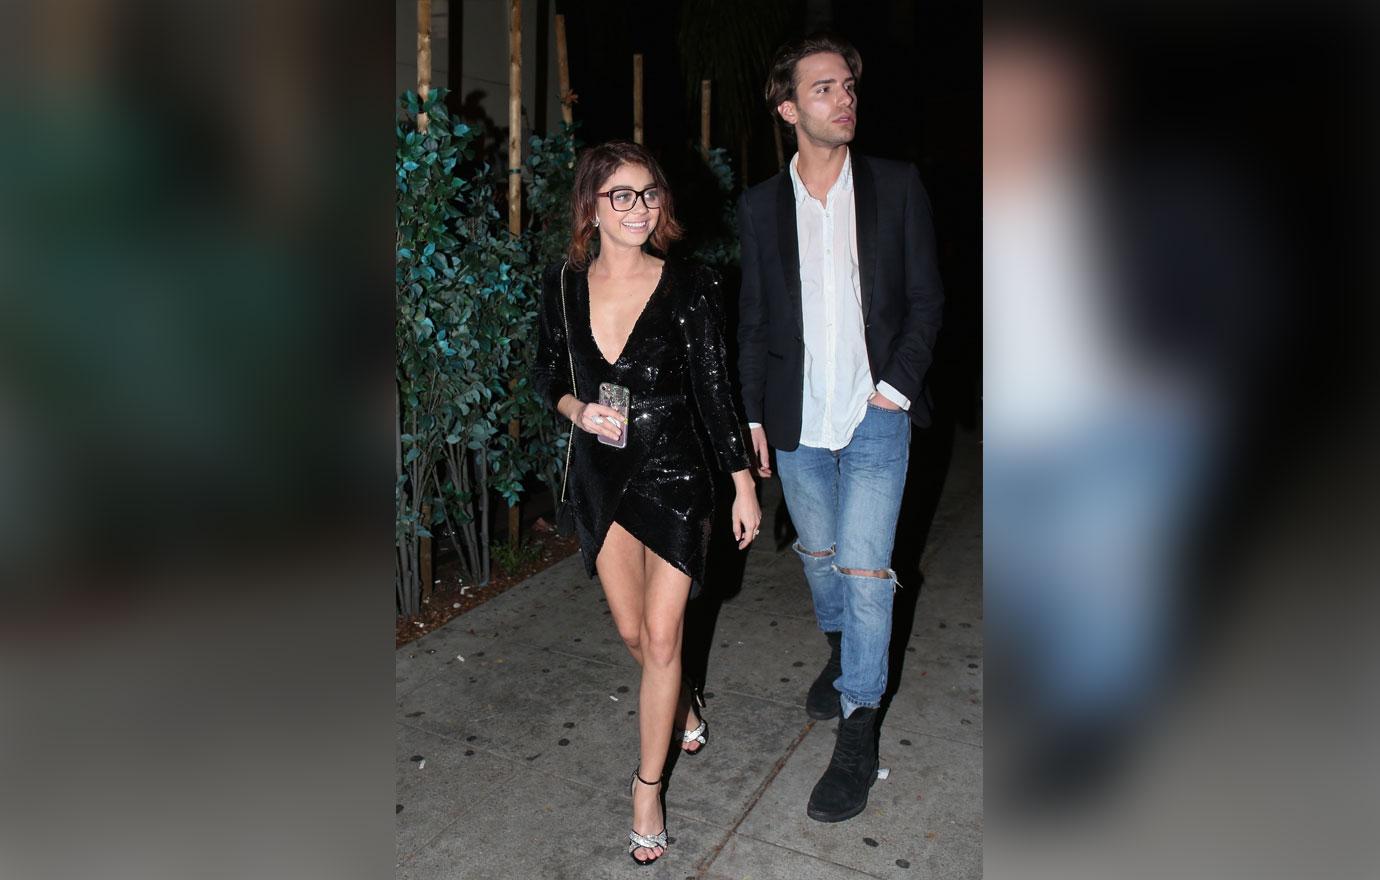 So Exposed! Sarah Hyland Flashes Nipple, Bare Thighs In Tiny Party Dress